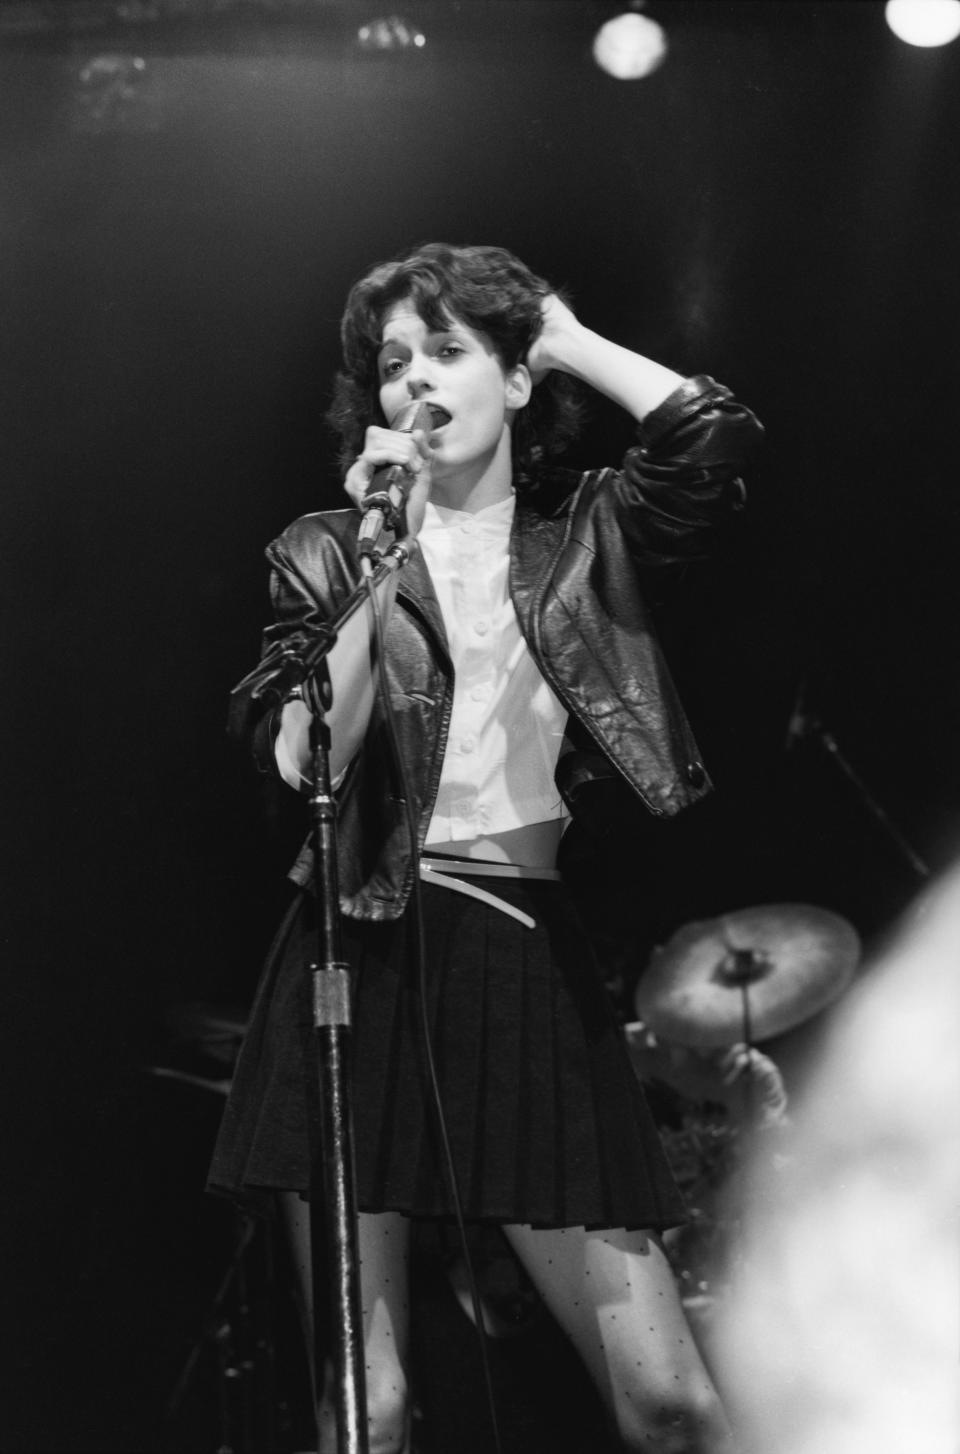 Patty Donahue of the Waitresses performs in concert at Perkins Palace in February 1982 in Pasadena, Calif. (Photo: Michael Ochs Archive/Getty Images)